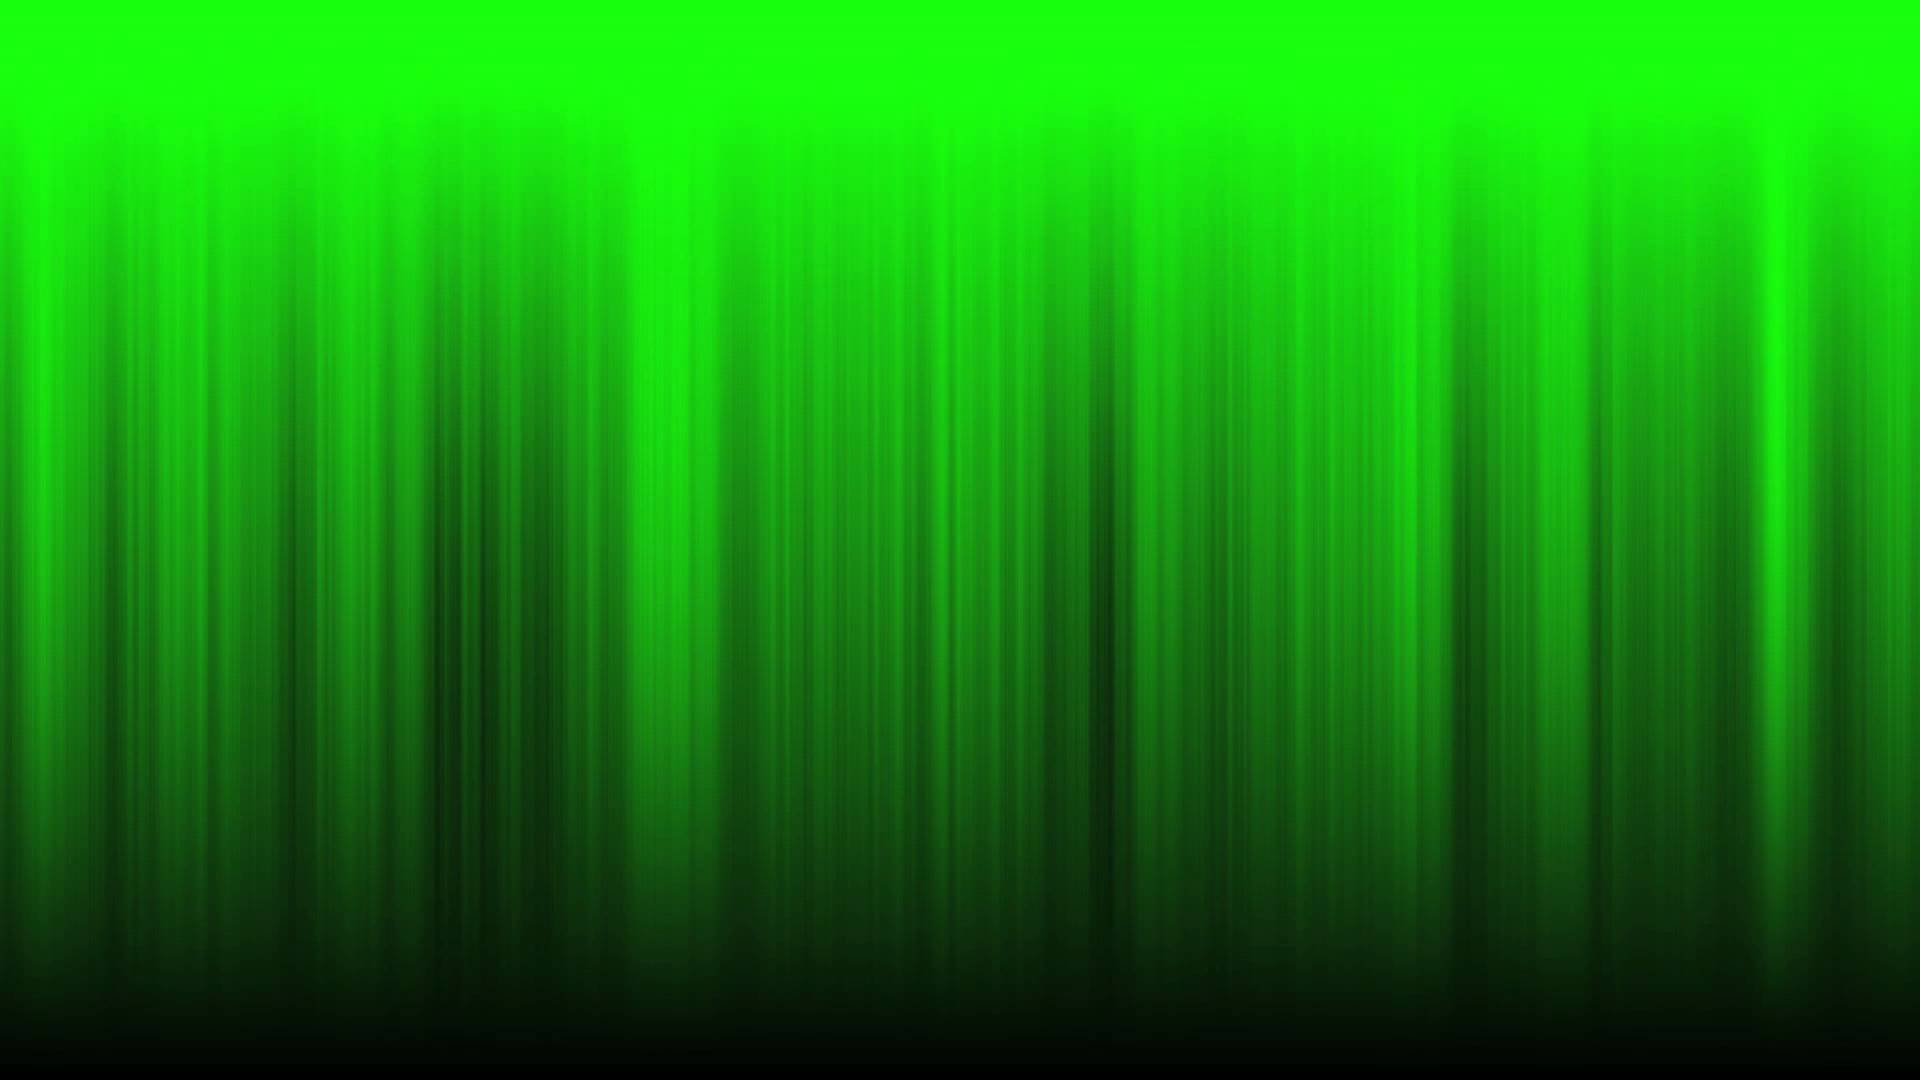 Spooky Background - Green Screen Animation - YouTube